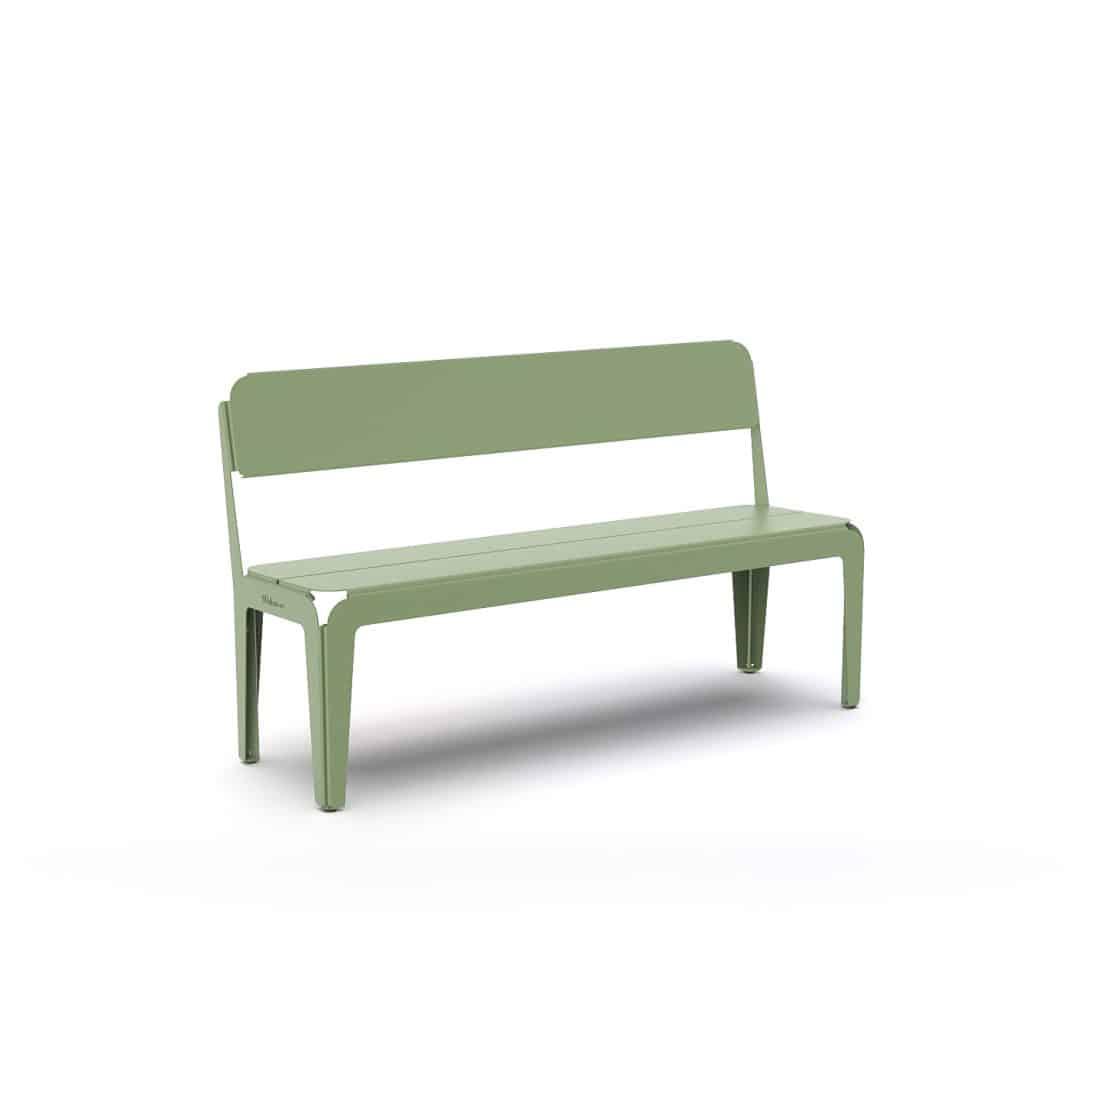 Trp Post Container Data Trp Post Id 6856 Bended Bench With Backrest Pale Green Trp Post Container